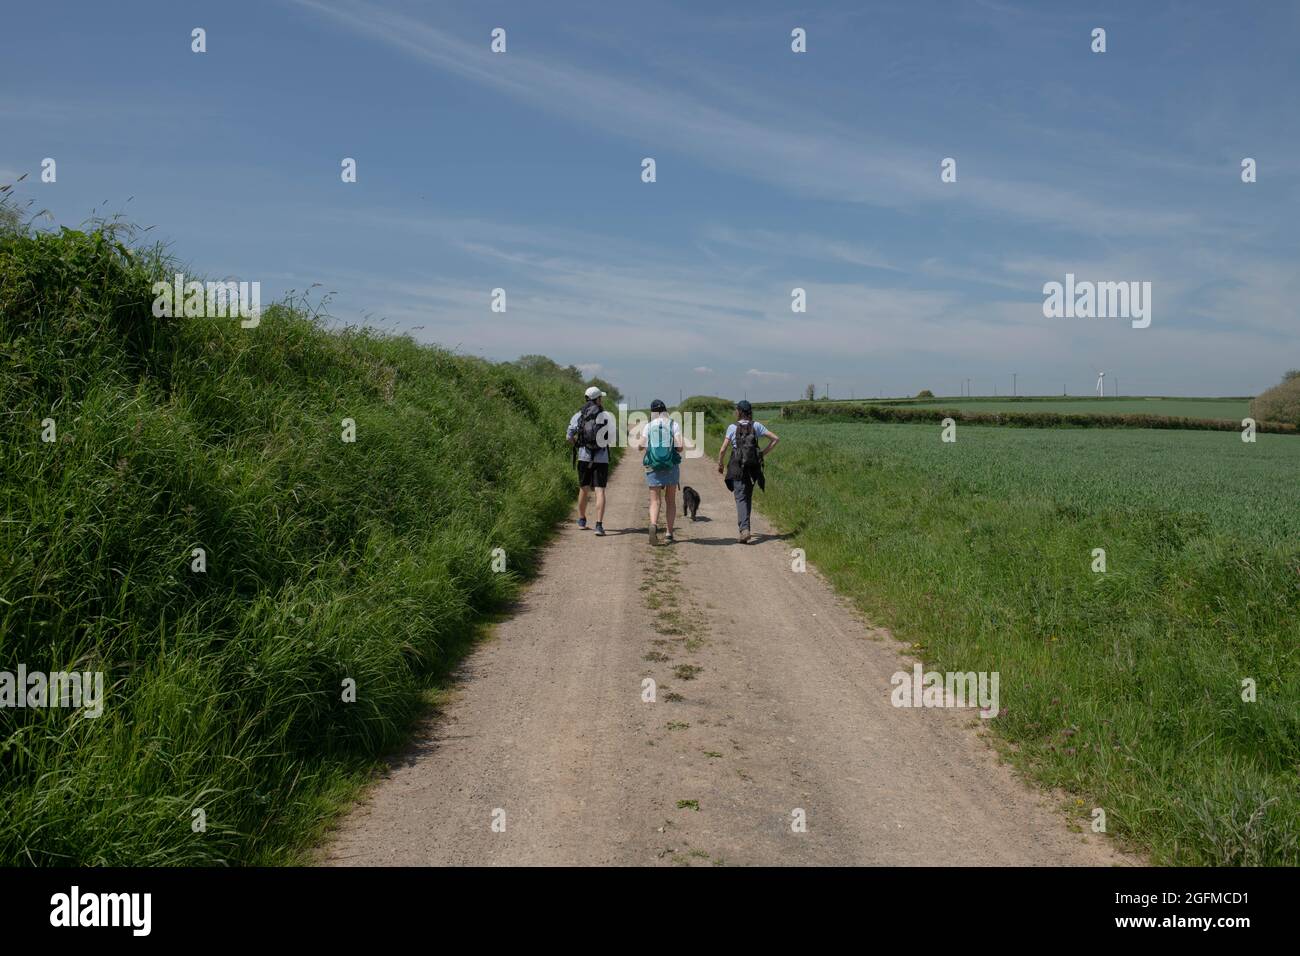 Group of Two Female and One Male Adults Walking Along a Dirt Track in the Rural Devon Countryside on a Bright Sunny Spring Day with a Blue Sky Stock Photo